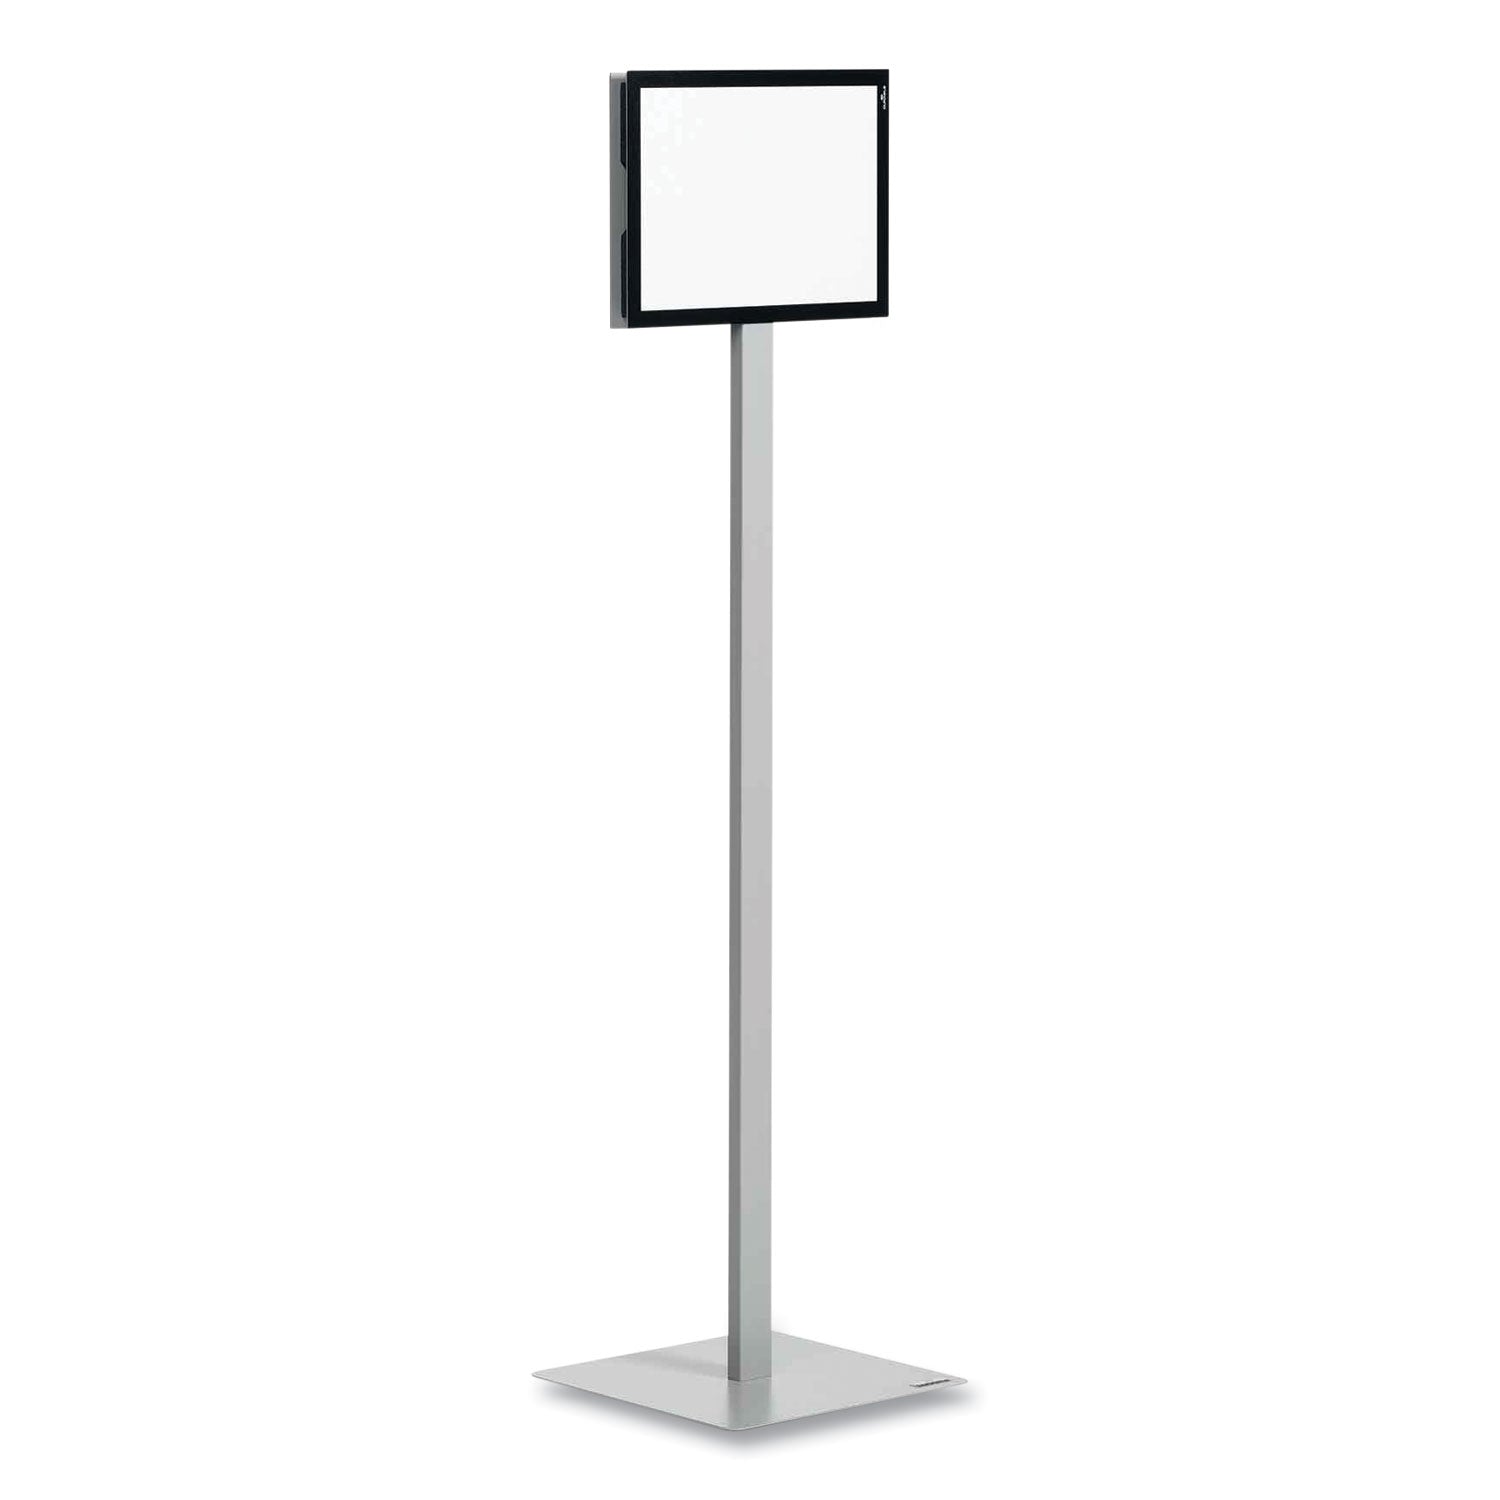 info-stand-basic-floor-stand-5157-tall-black-stand-85-x-11-face_dbl501057 - 2